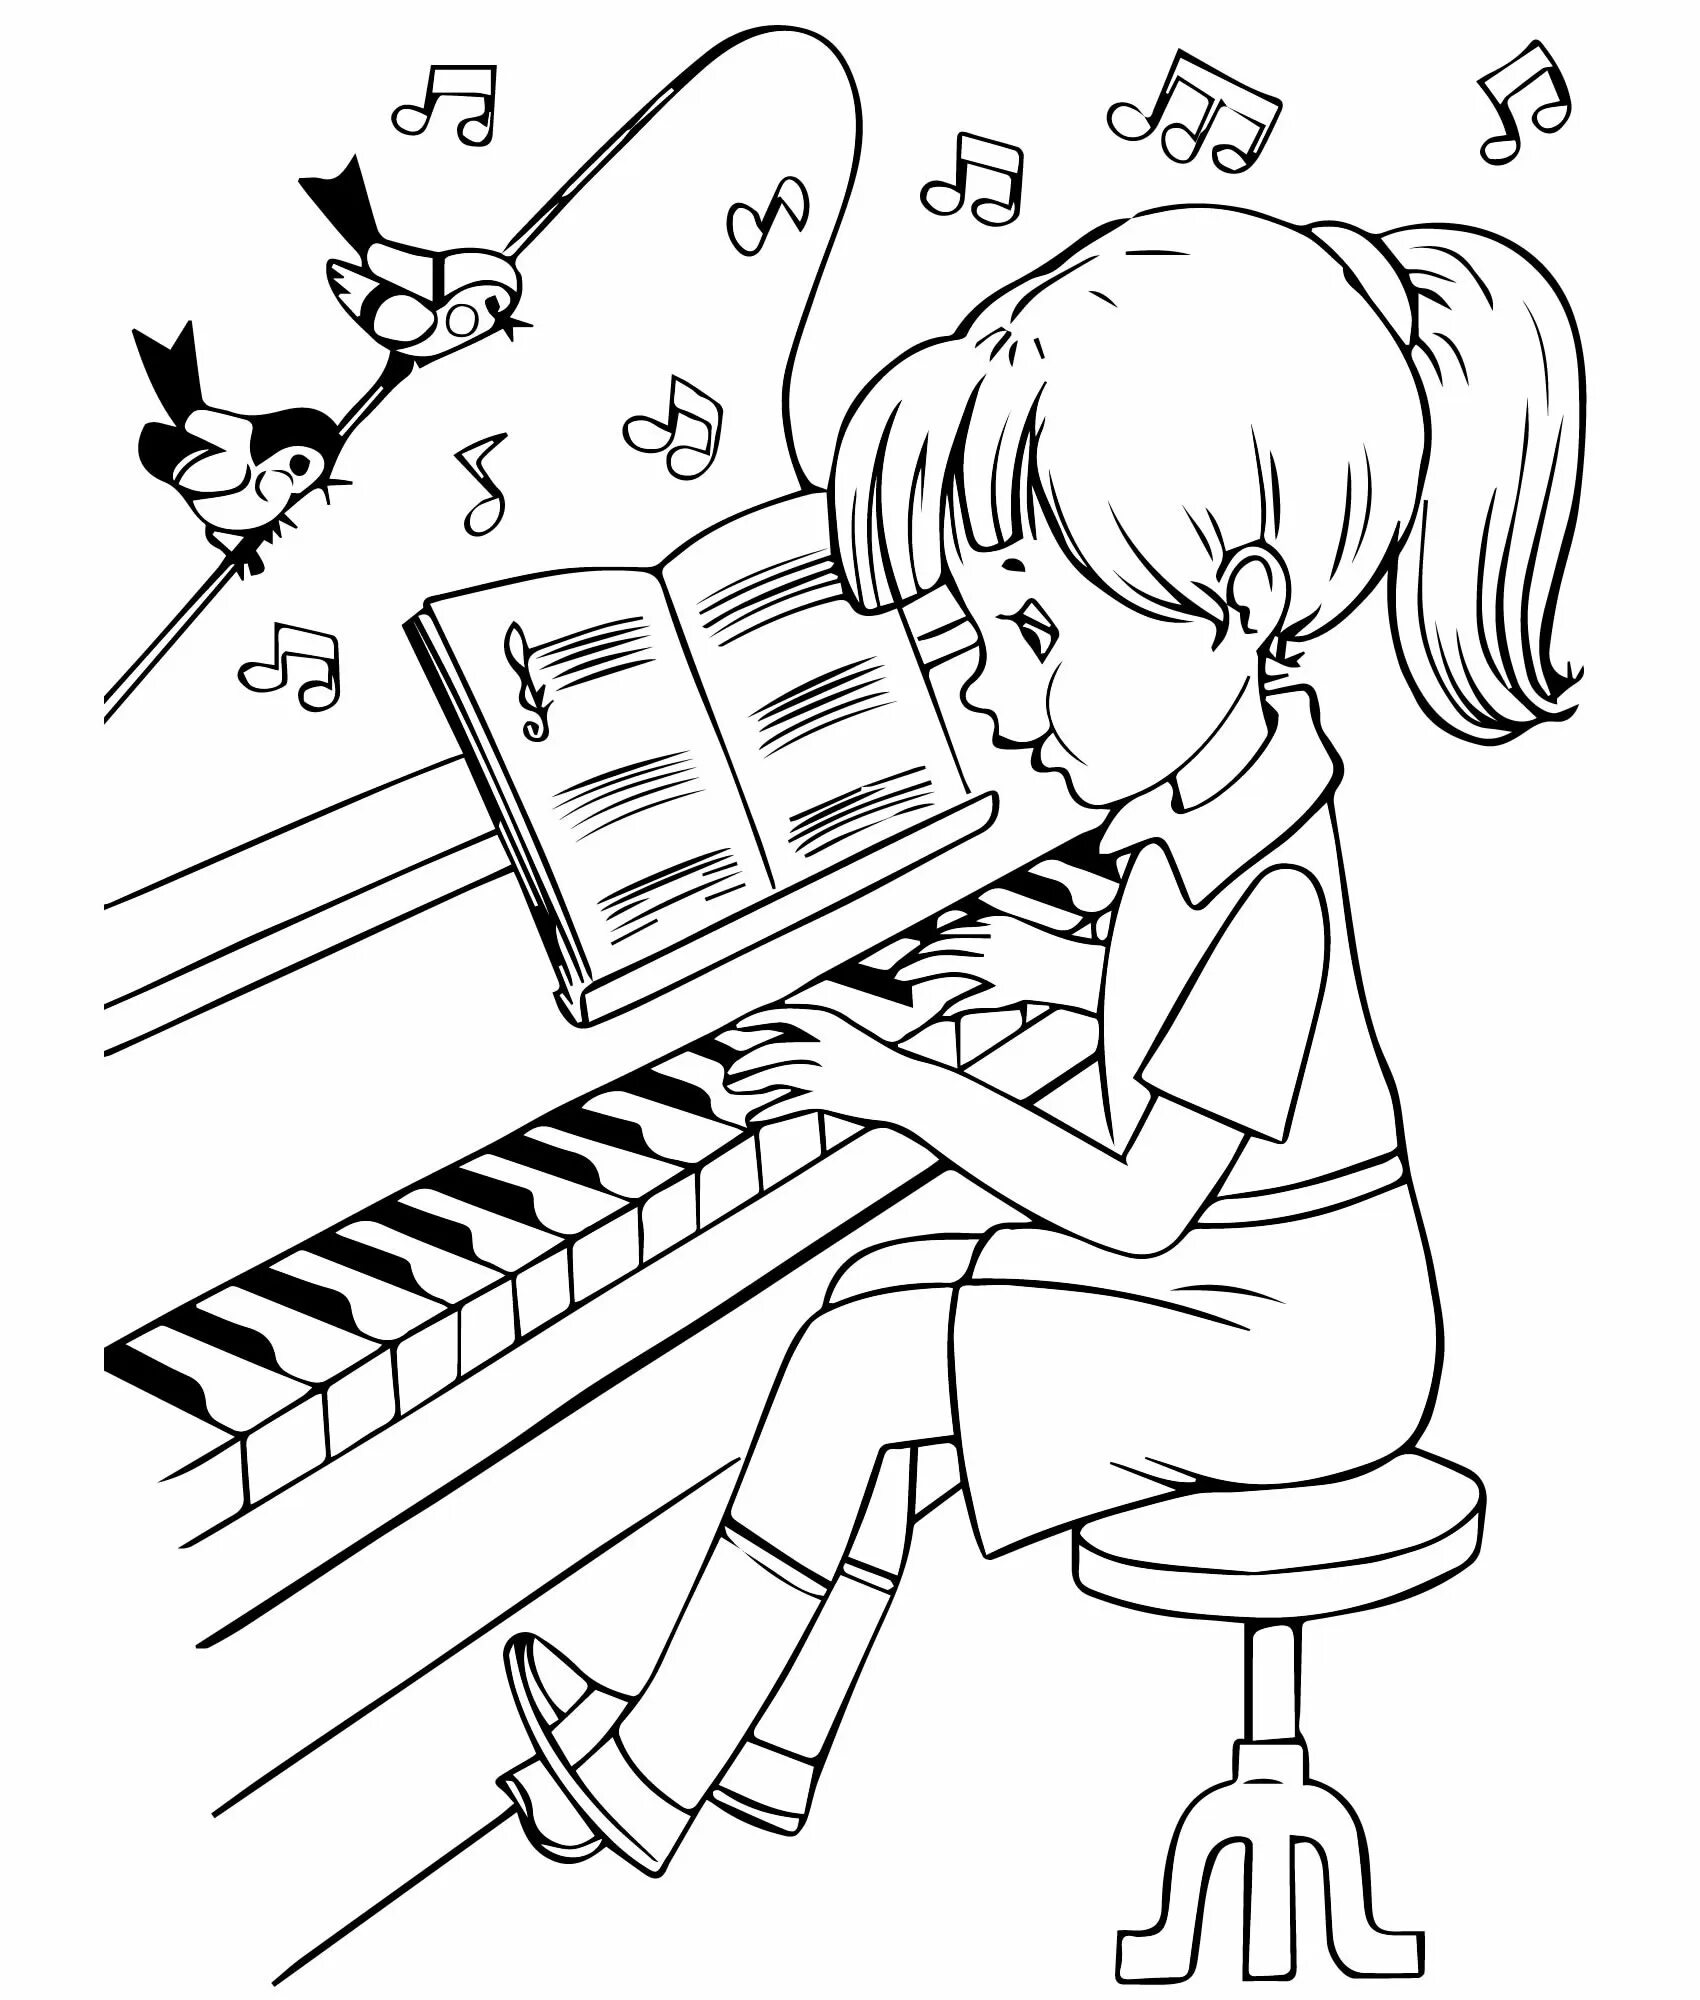 Musical for children at music lessons #9